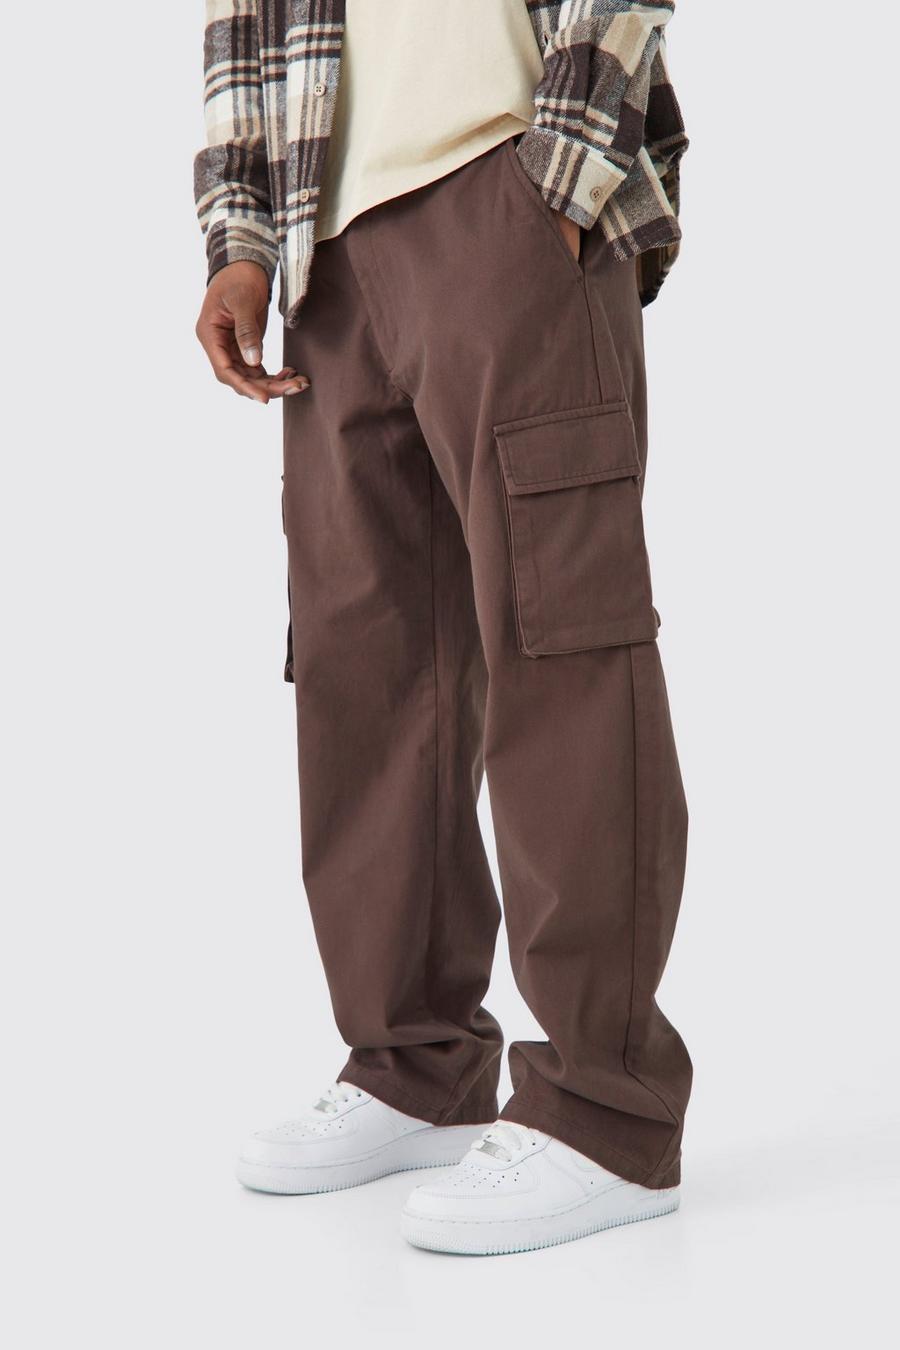 Chocolate marron Fixed Waist Relaxed Fit Cargo Trouser